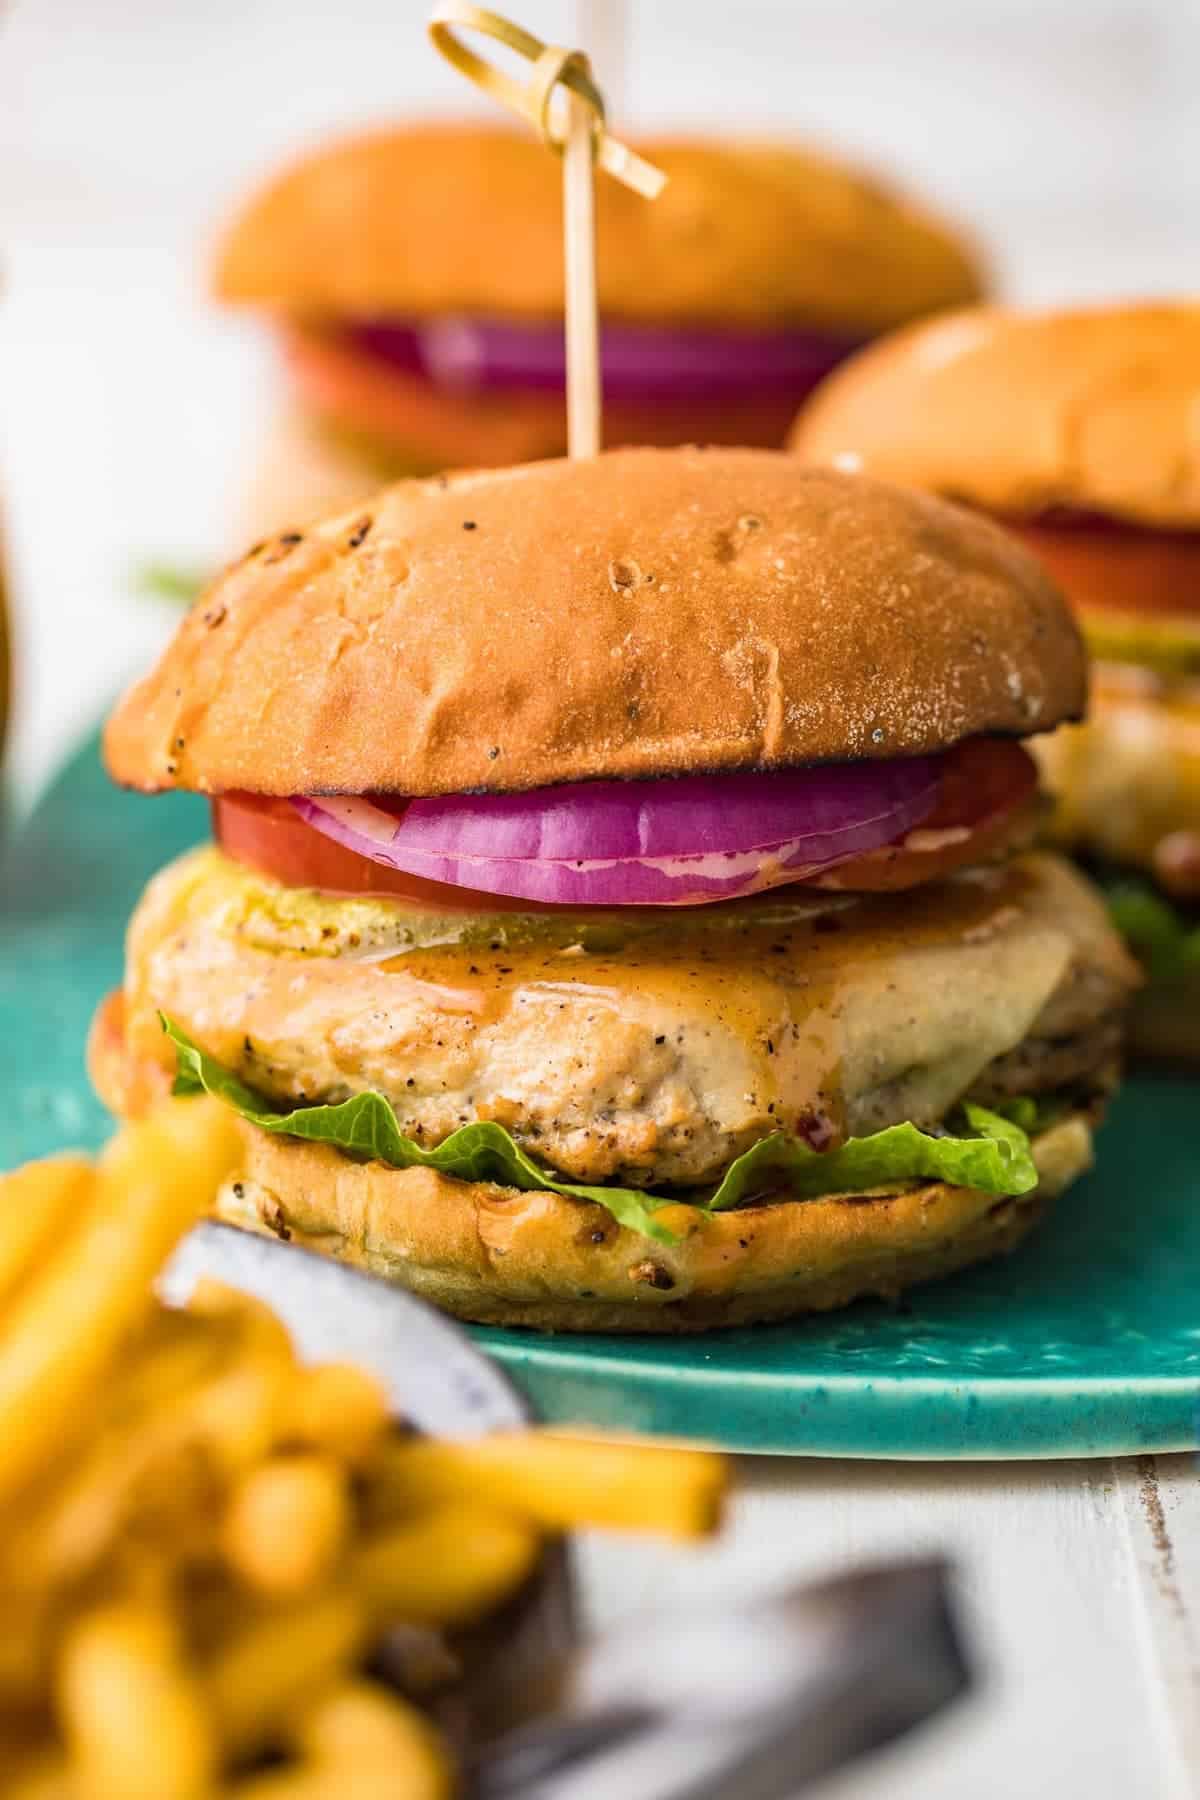 A juicy chicken burger served on a blue plate